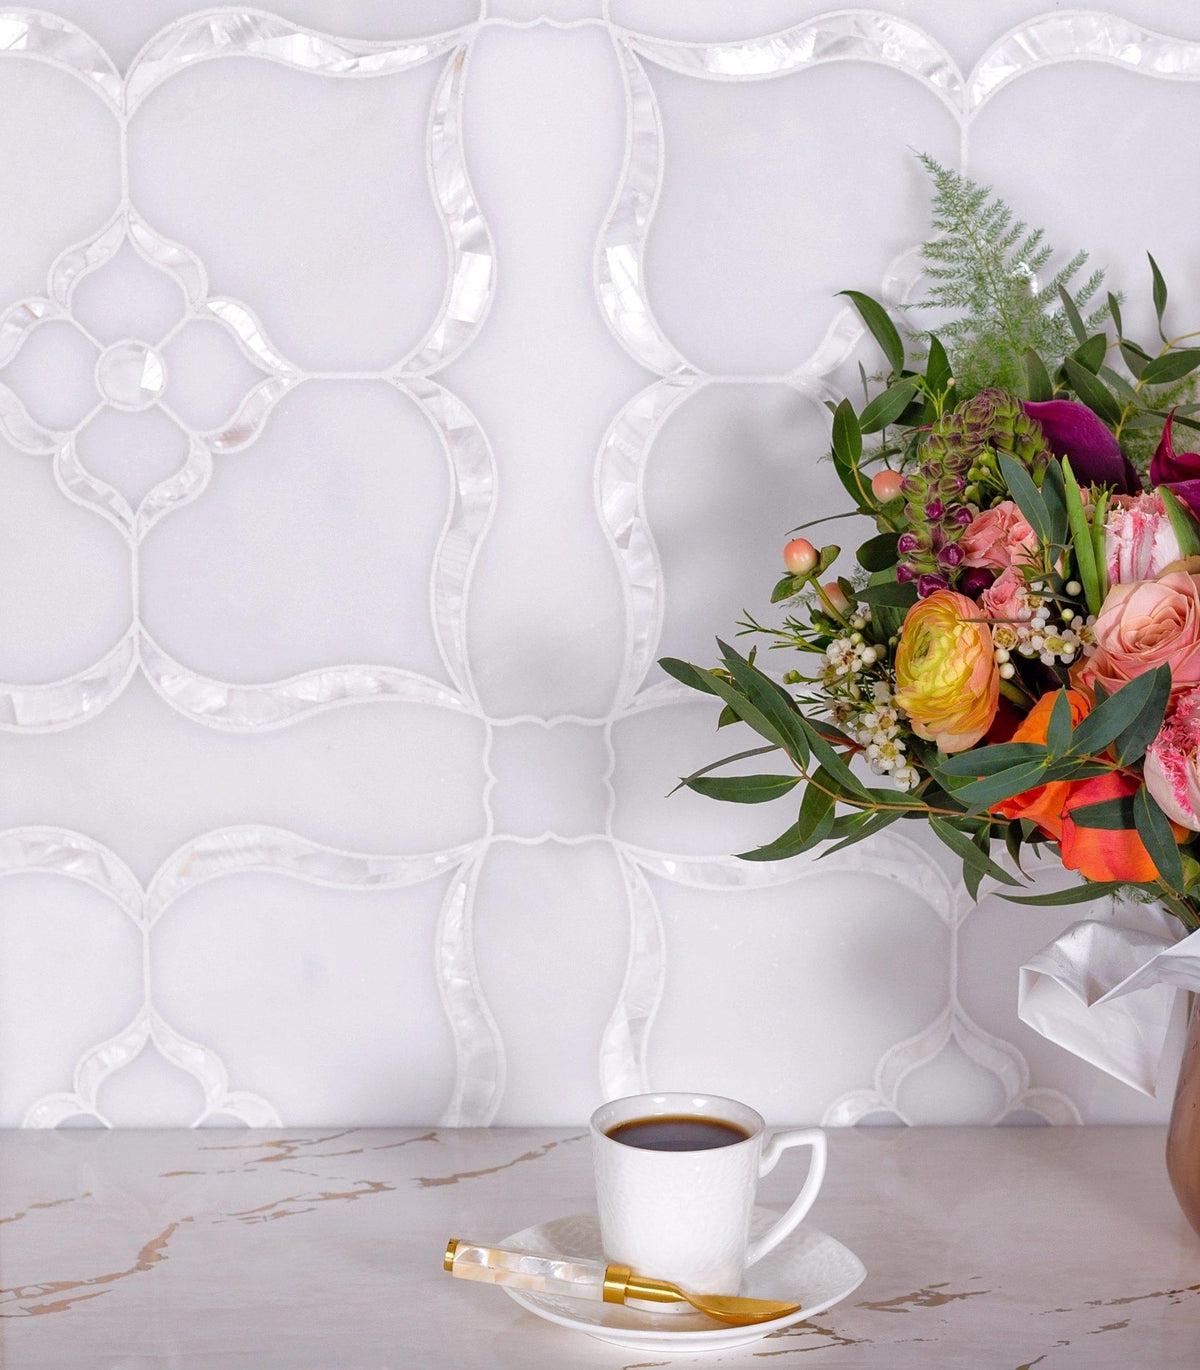 Pearl Flower White Marble & Mother Of Pearl Waterjet Mosaic Tile